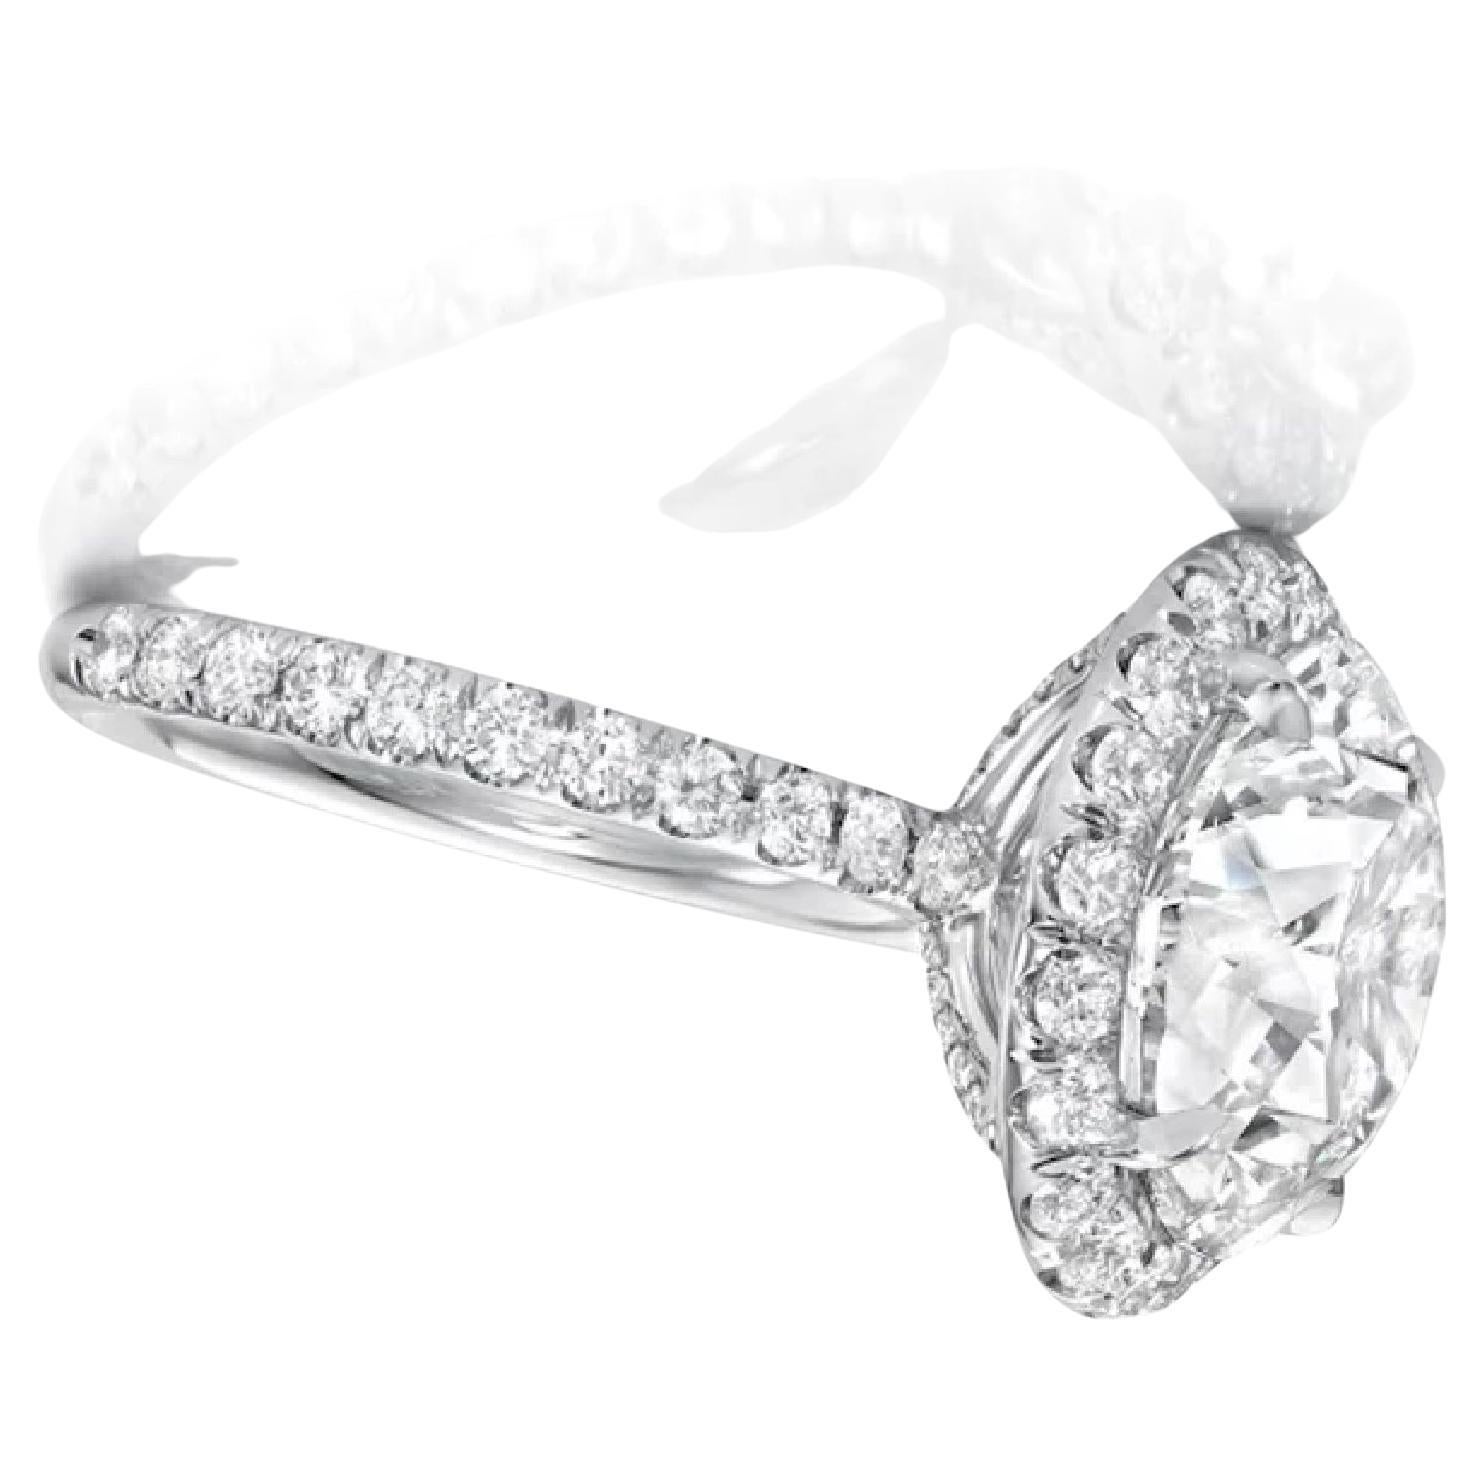 This unique diamond ring is proudly offered by Antinori Fine Jewels

This 4 carat GIA certified G Color Internally Flawless clarity round brilliant cut triple excellent diamond is set in a handcrafted Antinori Fine Jewels platinum and diamond ring.